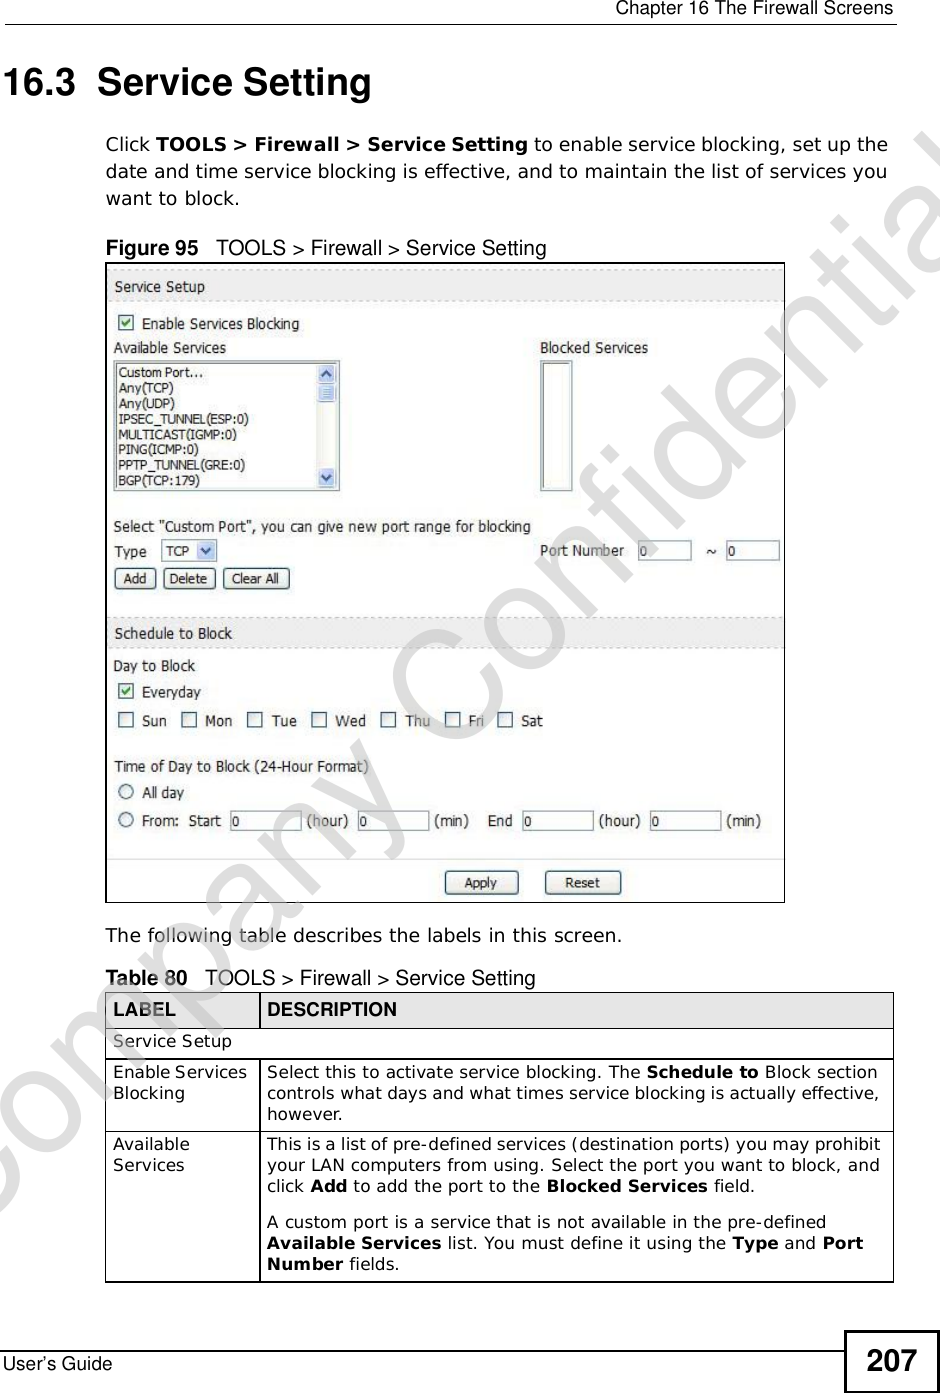  Chapter 16The Firewall ScreensUser’s Guide 20716.3  Service SettingClick TOOLS &gt; Firewall &gt; Service Setting to enable service blocking, set up the date and time service blocking is effective, and to maintain the list of services you want to block.Figure 95   TOOLS &gt; Firewall &gt; Service SettingThe following table describes the labels in this screen.Table 80   TOOLS &gt; Firewall &gt; Service SettingLABEL DESCRIPTIONService SetupEnable Services Blocking Select this to activate service blocking. The Schedule to Block section controls what days and what times service blocking is actually effective, however.Available Services This is a list of pre-defined services (destination ports) you may prohibit your LAN computers from using. Select the port you want to block, and click Add to add the port to the Blocked Services field.A custom port is a service that is not available in the pre-defined Available Services list. You must define it using the Type and PortNumber fields.Company Confidential